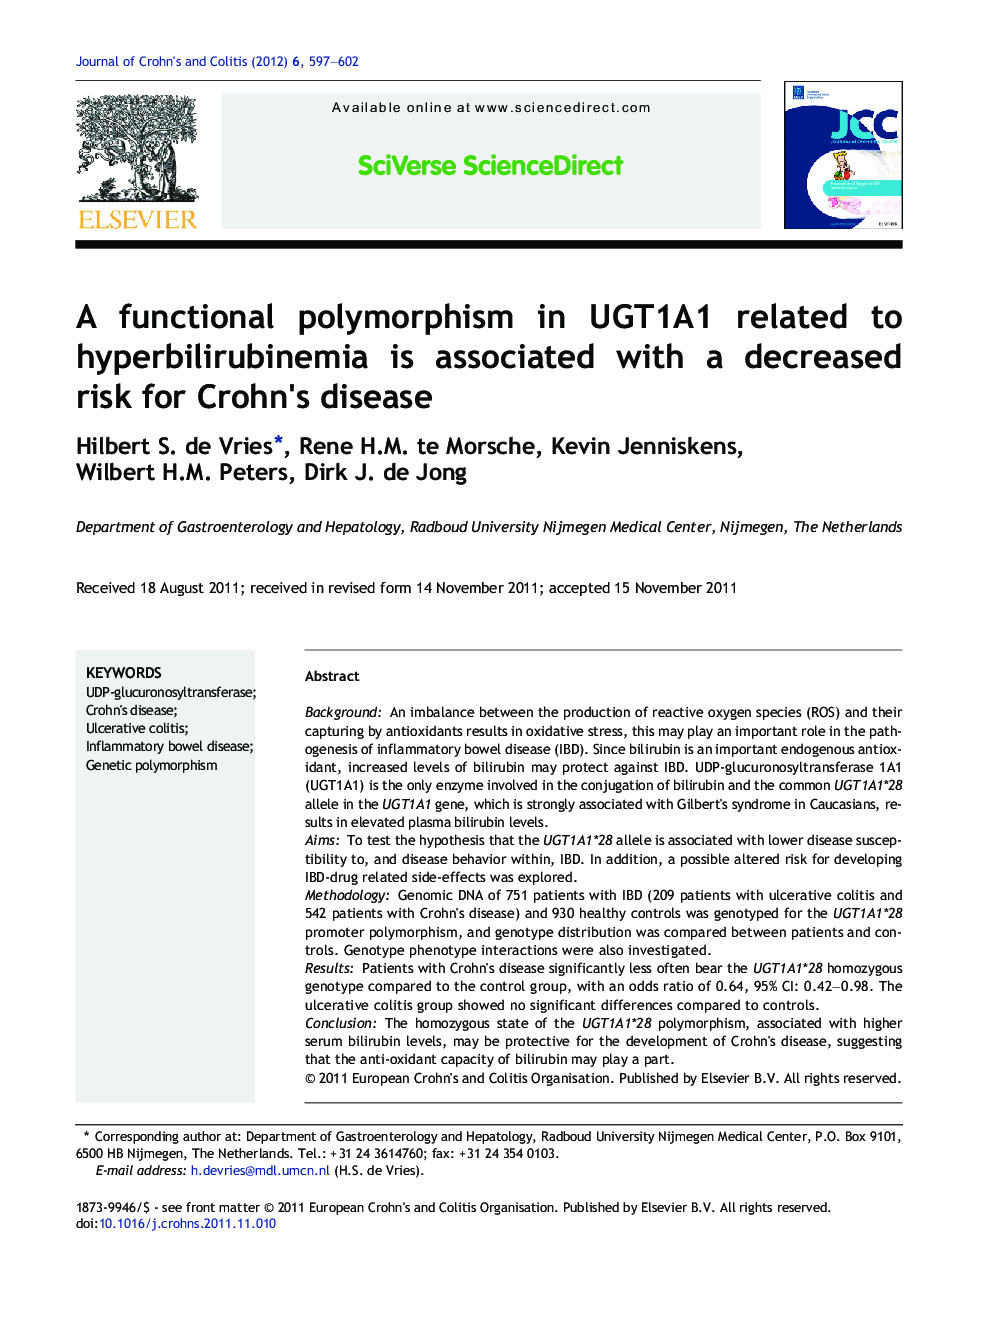 A functional polymorphism in UGT1A1 related to hyperbilirubinemia is associated with a decreased risk for Crohn's disease